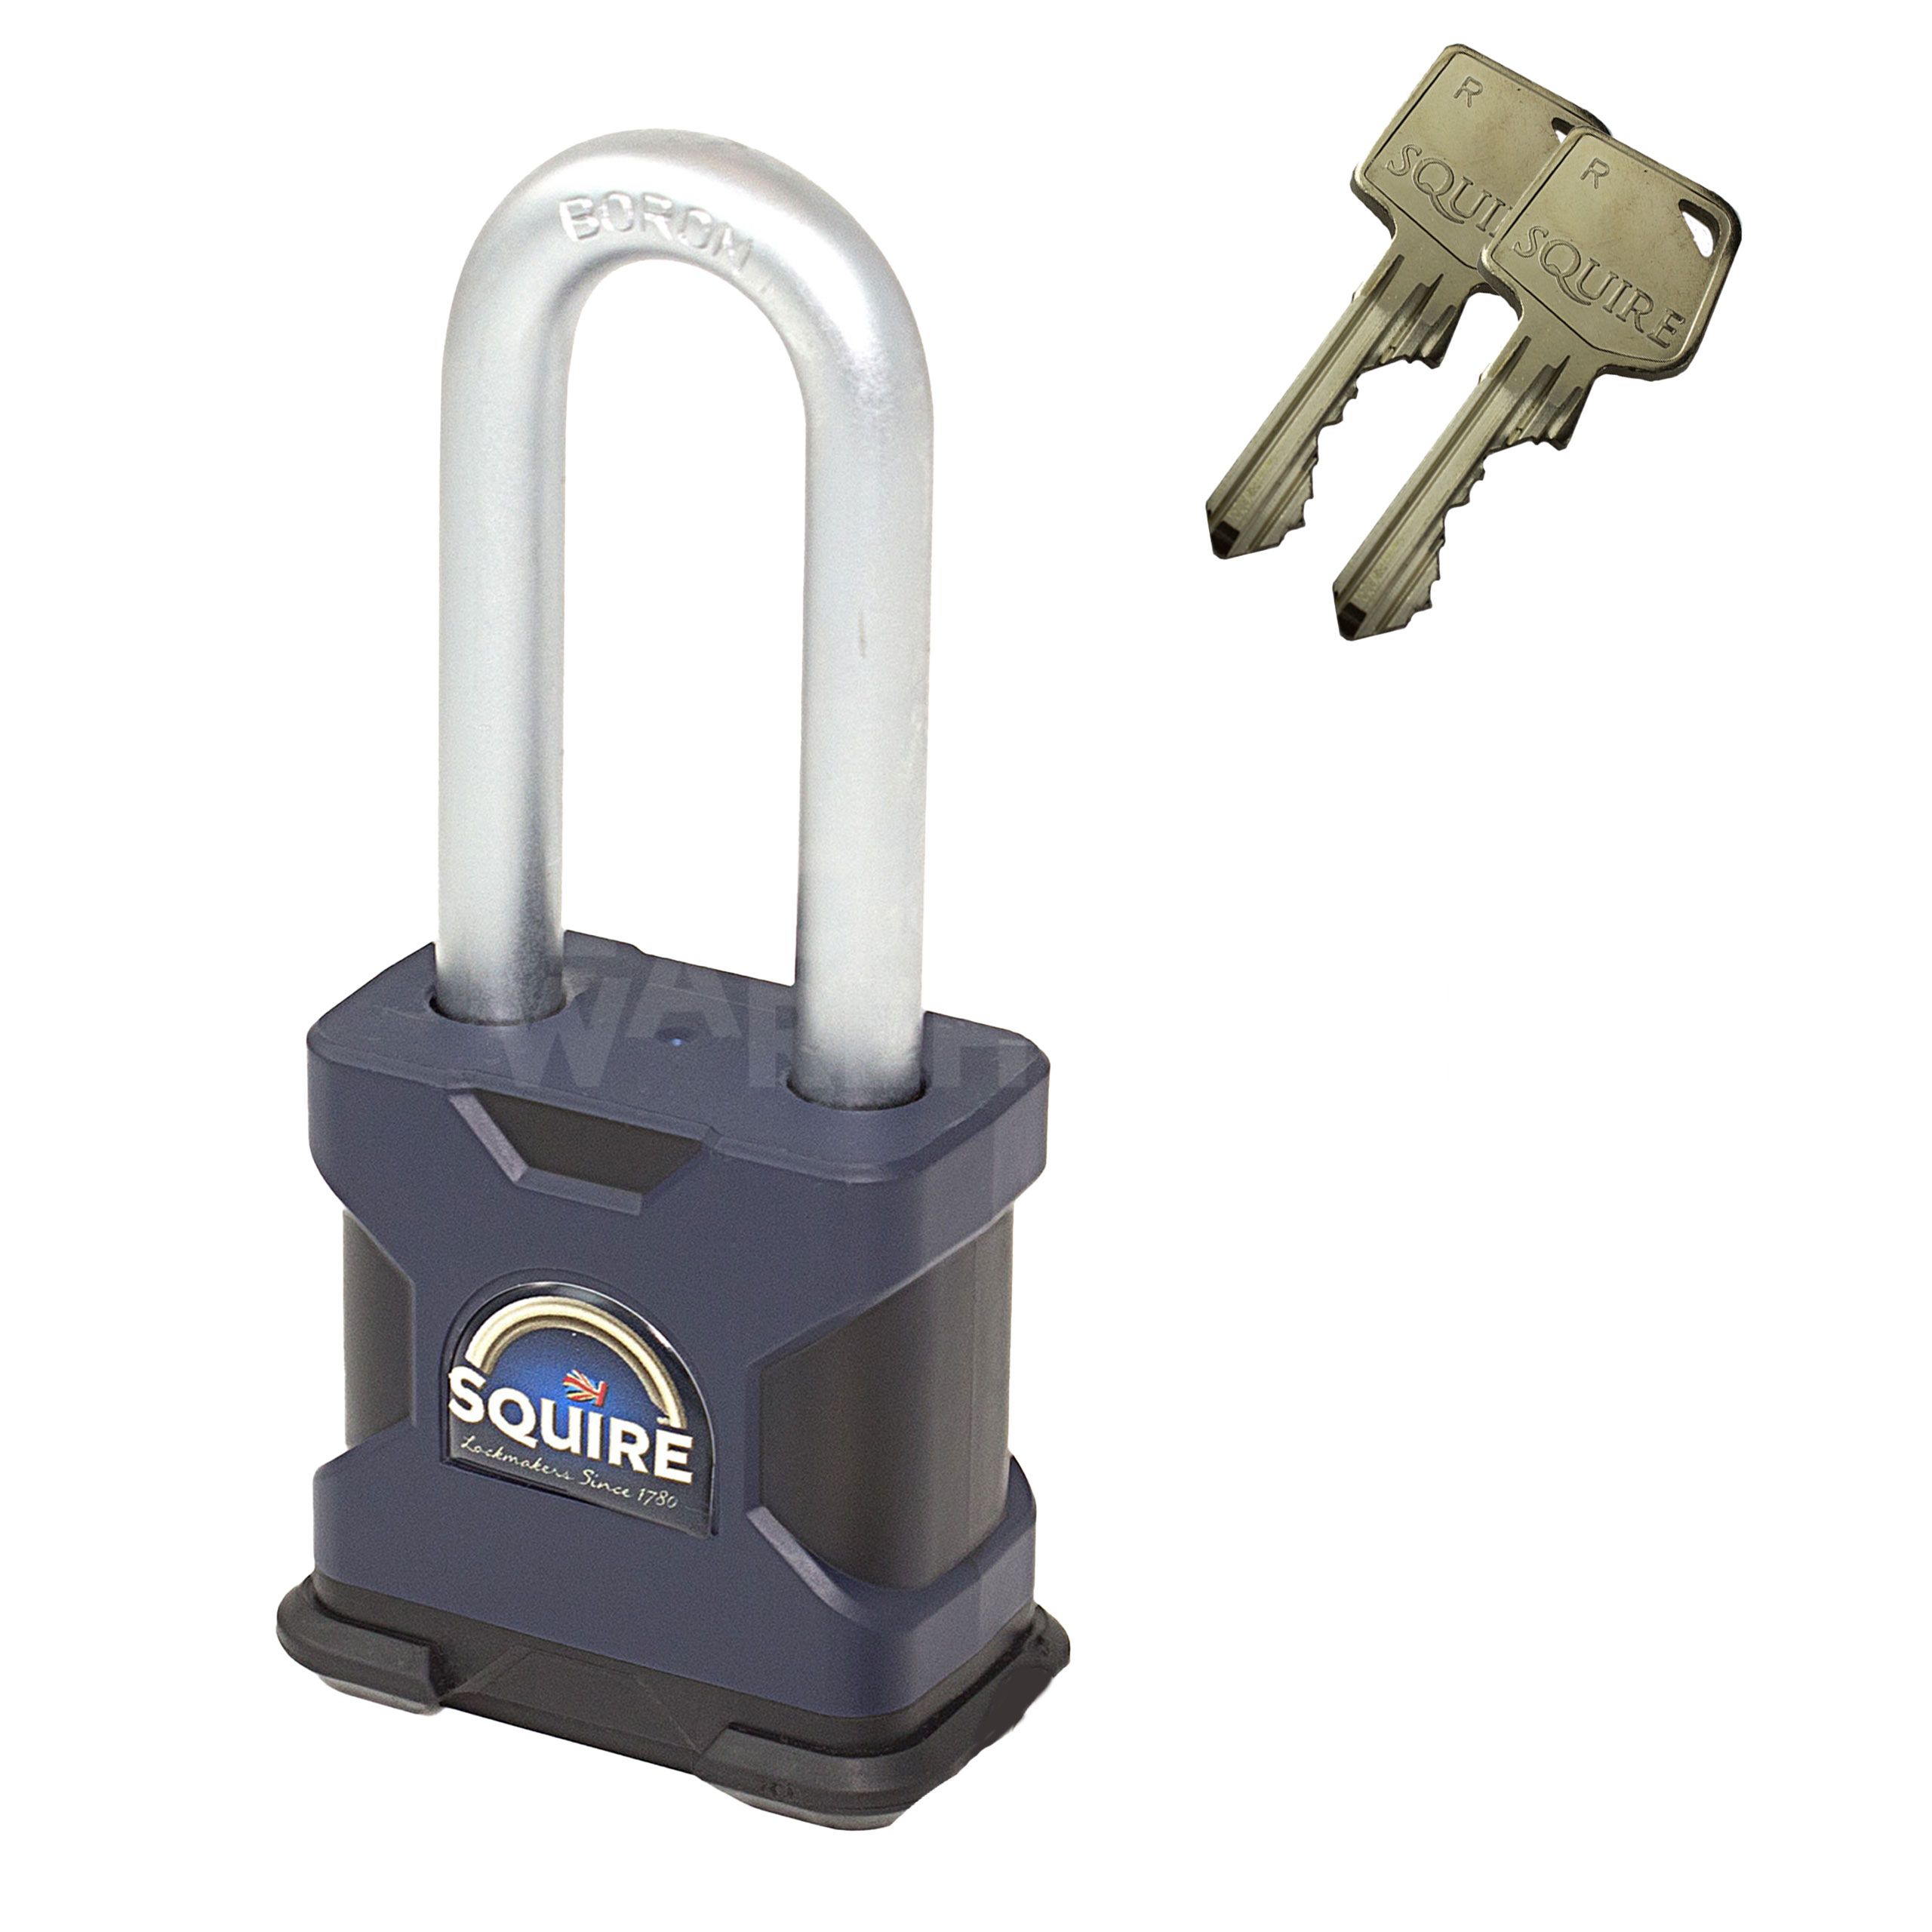 SQUIRE SS50S Stronghold® Long Shackle Padlock - Registered key Section